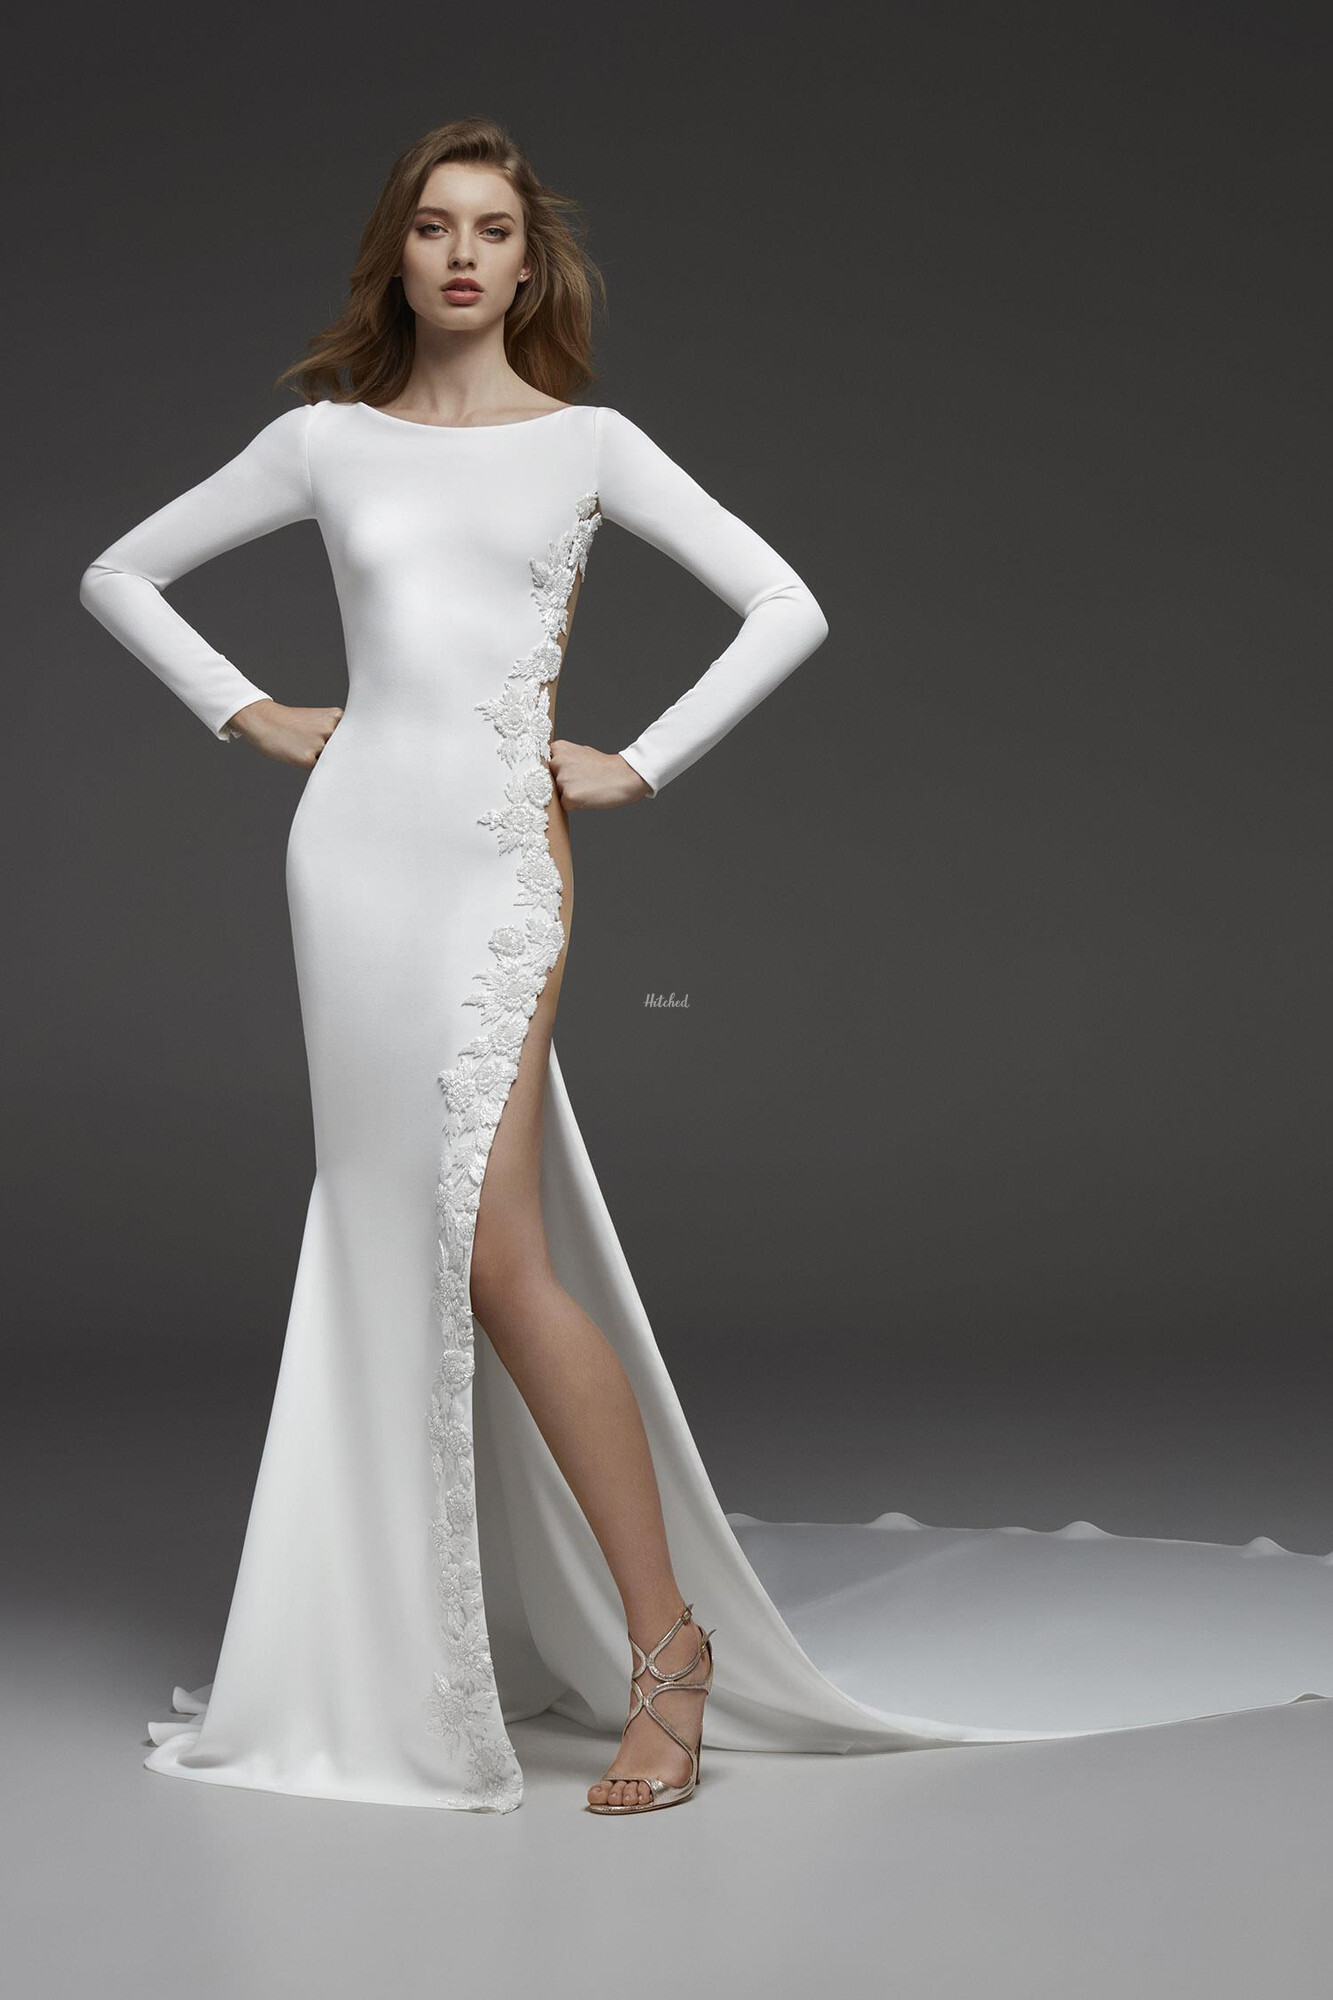 Camilla Wedding Dress from Atelier Pronovias - hitched.co.uk